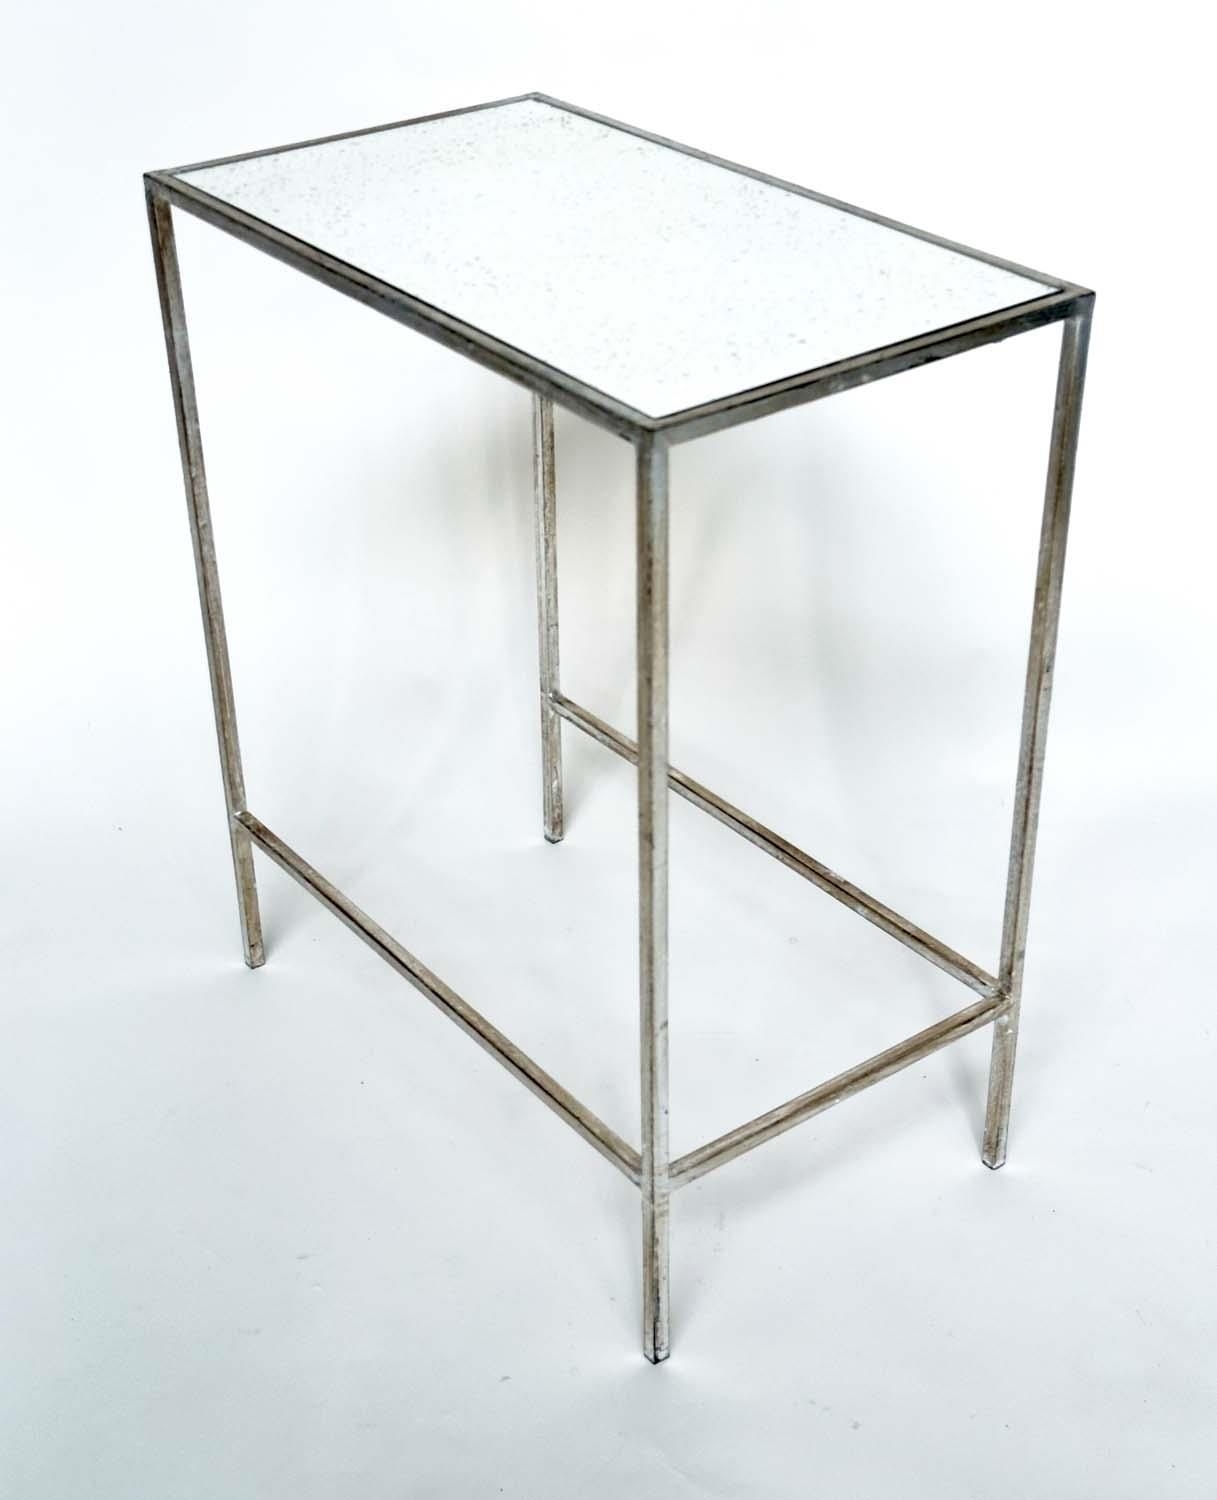 SIDE TABLES, a pair, French style, rectangular antique style leaf silvered metal framed and mirror - Image 6 of 6